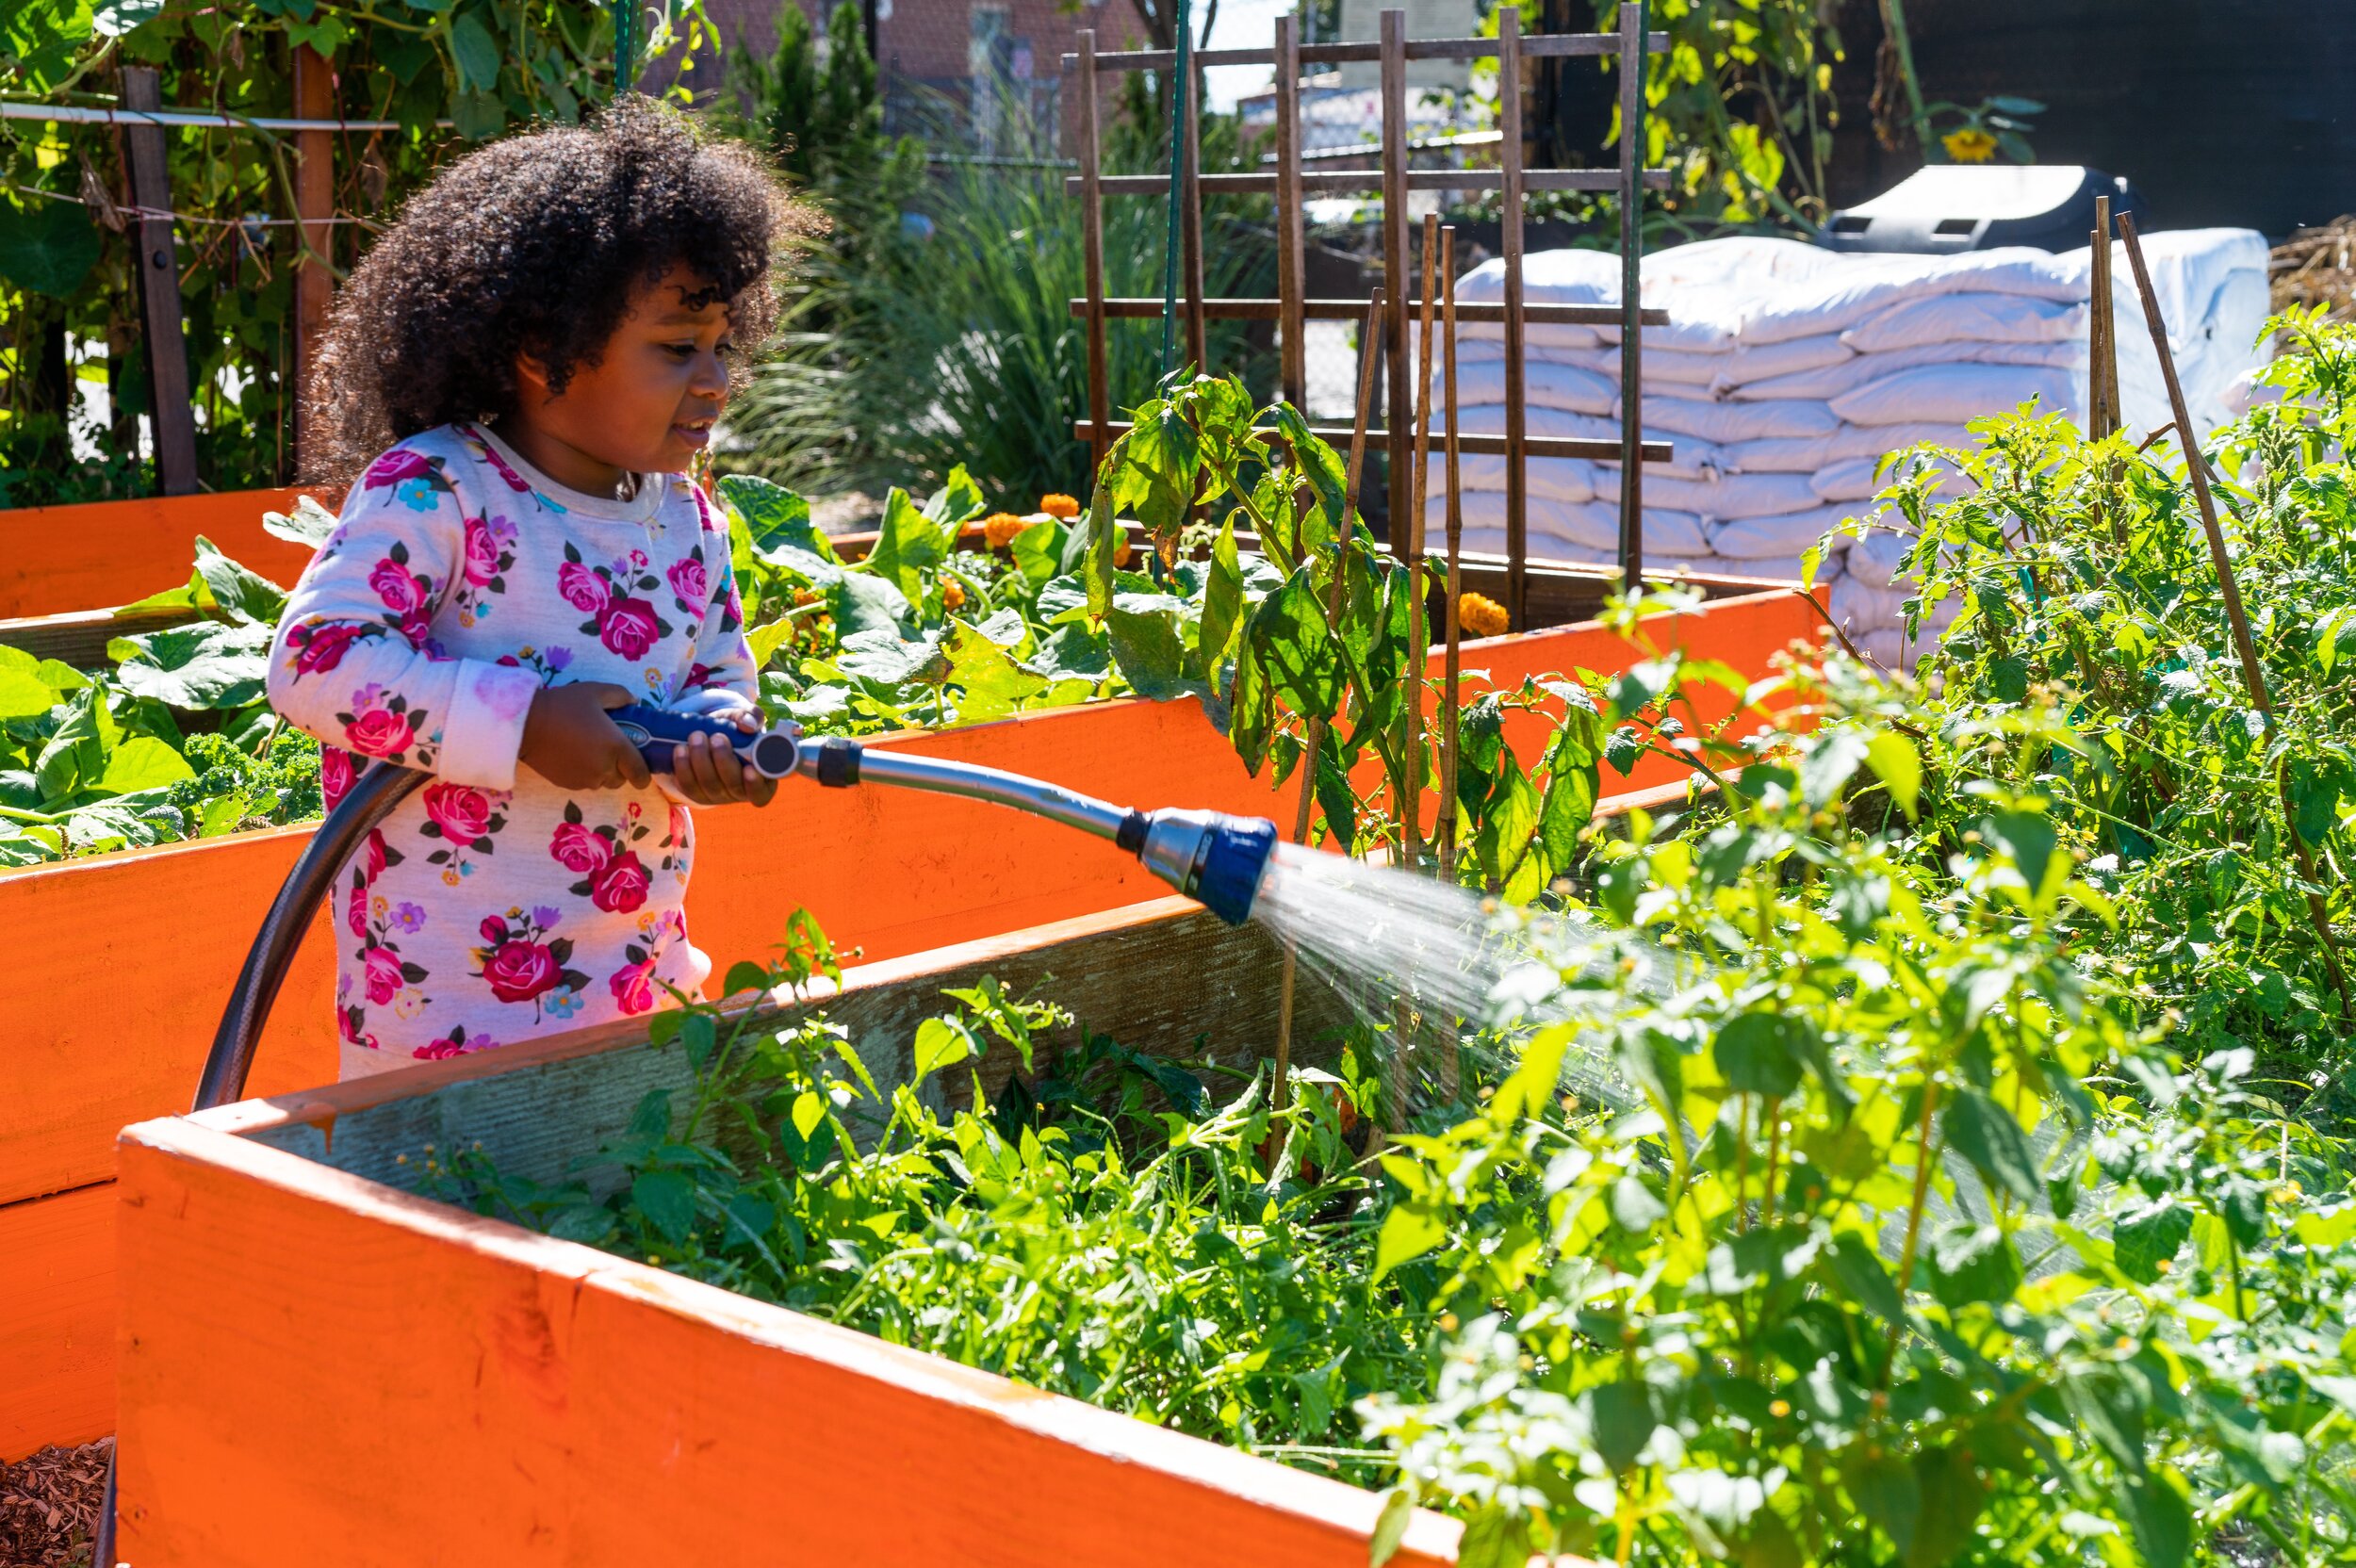   A young gardener helps with watering at the Rockaway Youth Task Force Farm. In their vision for the expanded farm, the Rockaway Youth Task Force plans to have an area just for children to explore gardening.  